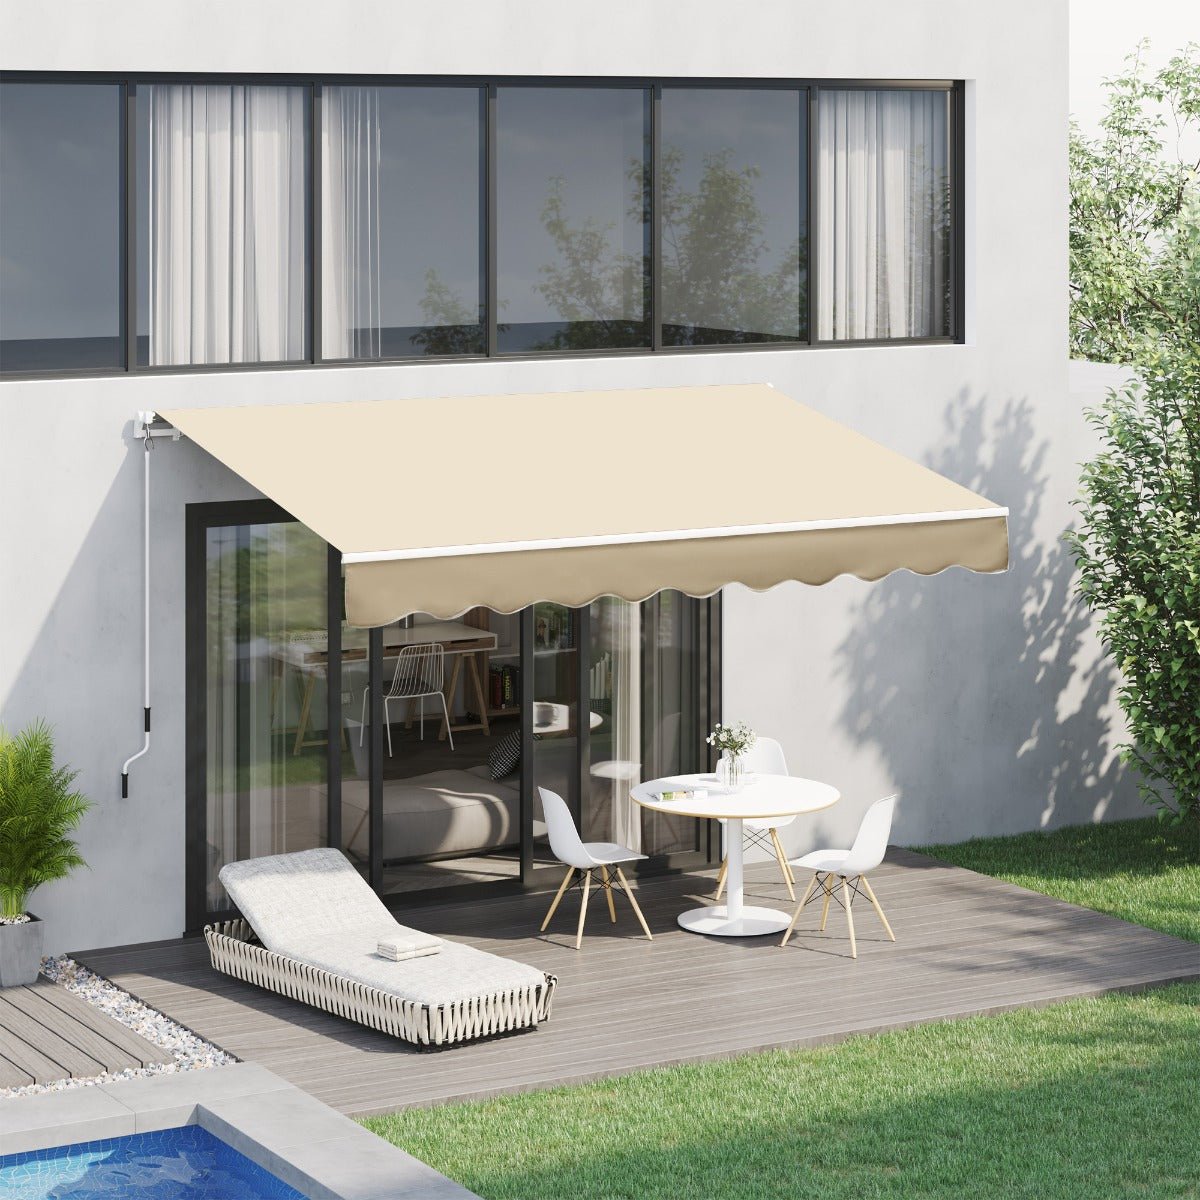 Outdoor and Garden-10' x 8' Manual Retractable Awning Sun Shade Shelter for Patio Deck Yard with UV Protection and Easy Crank Opening, Beige - Outdoor Style Company